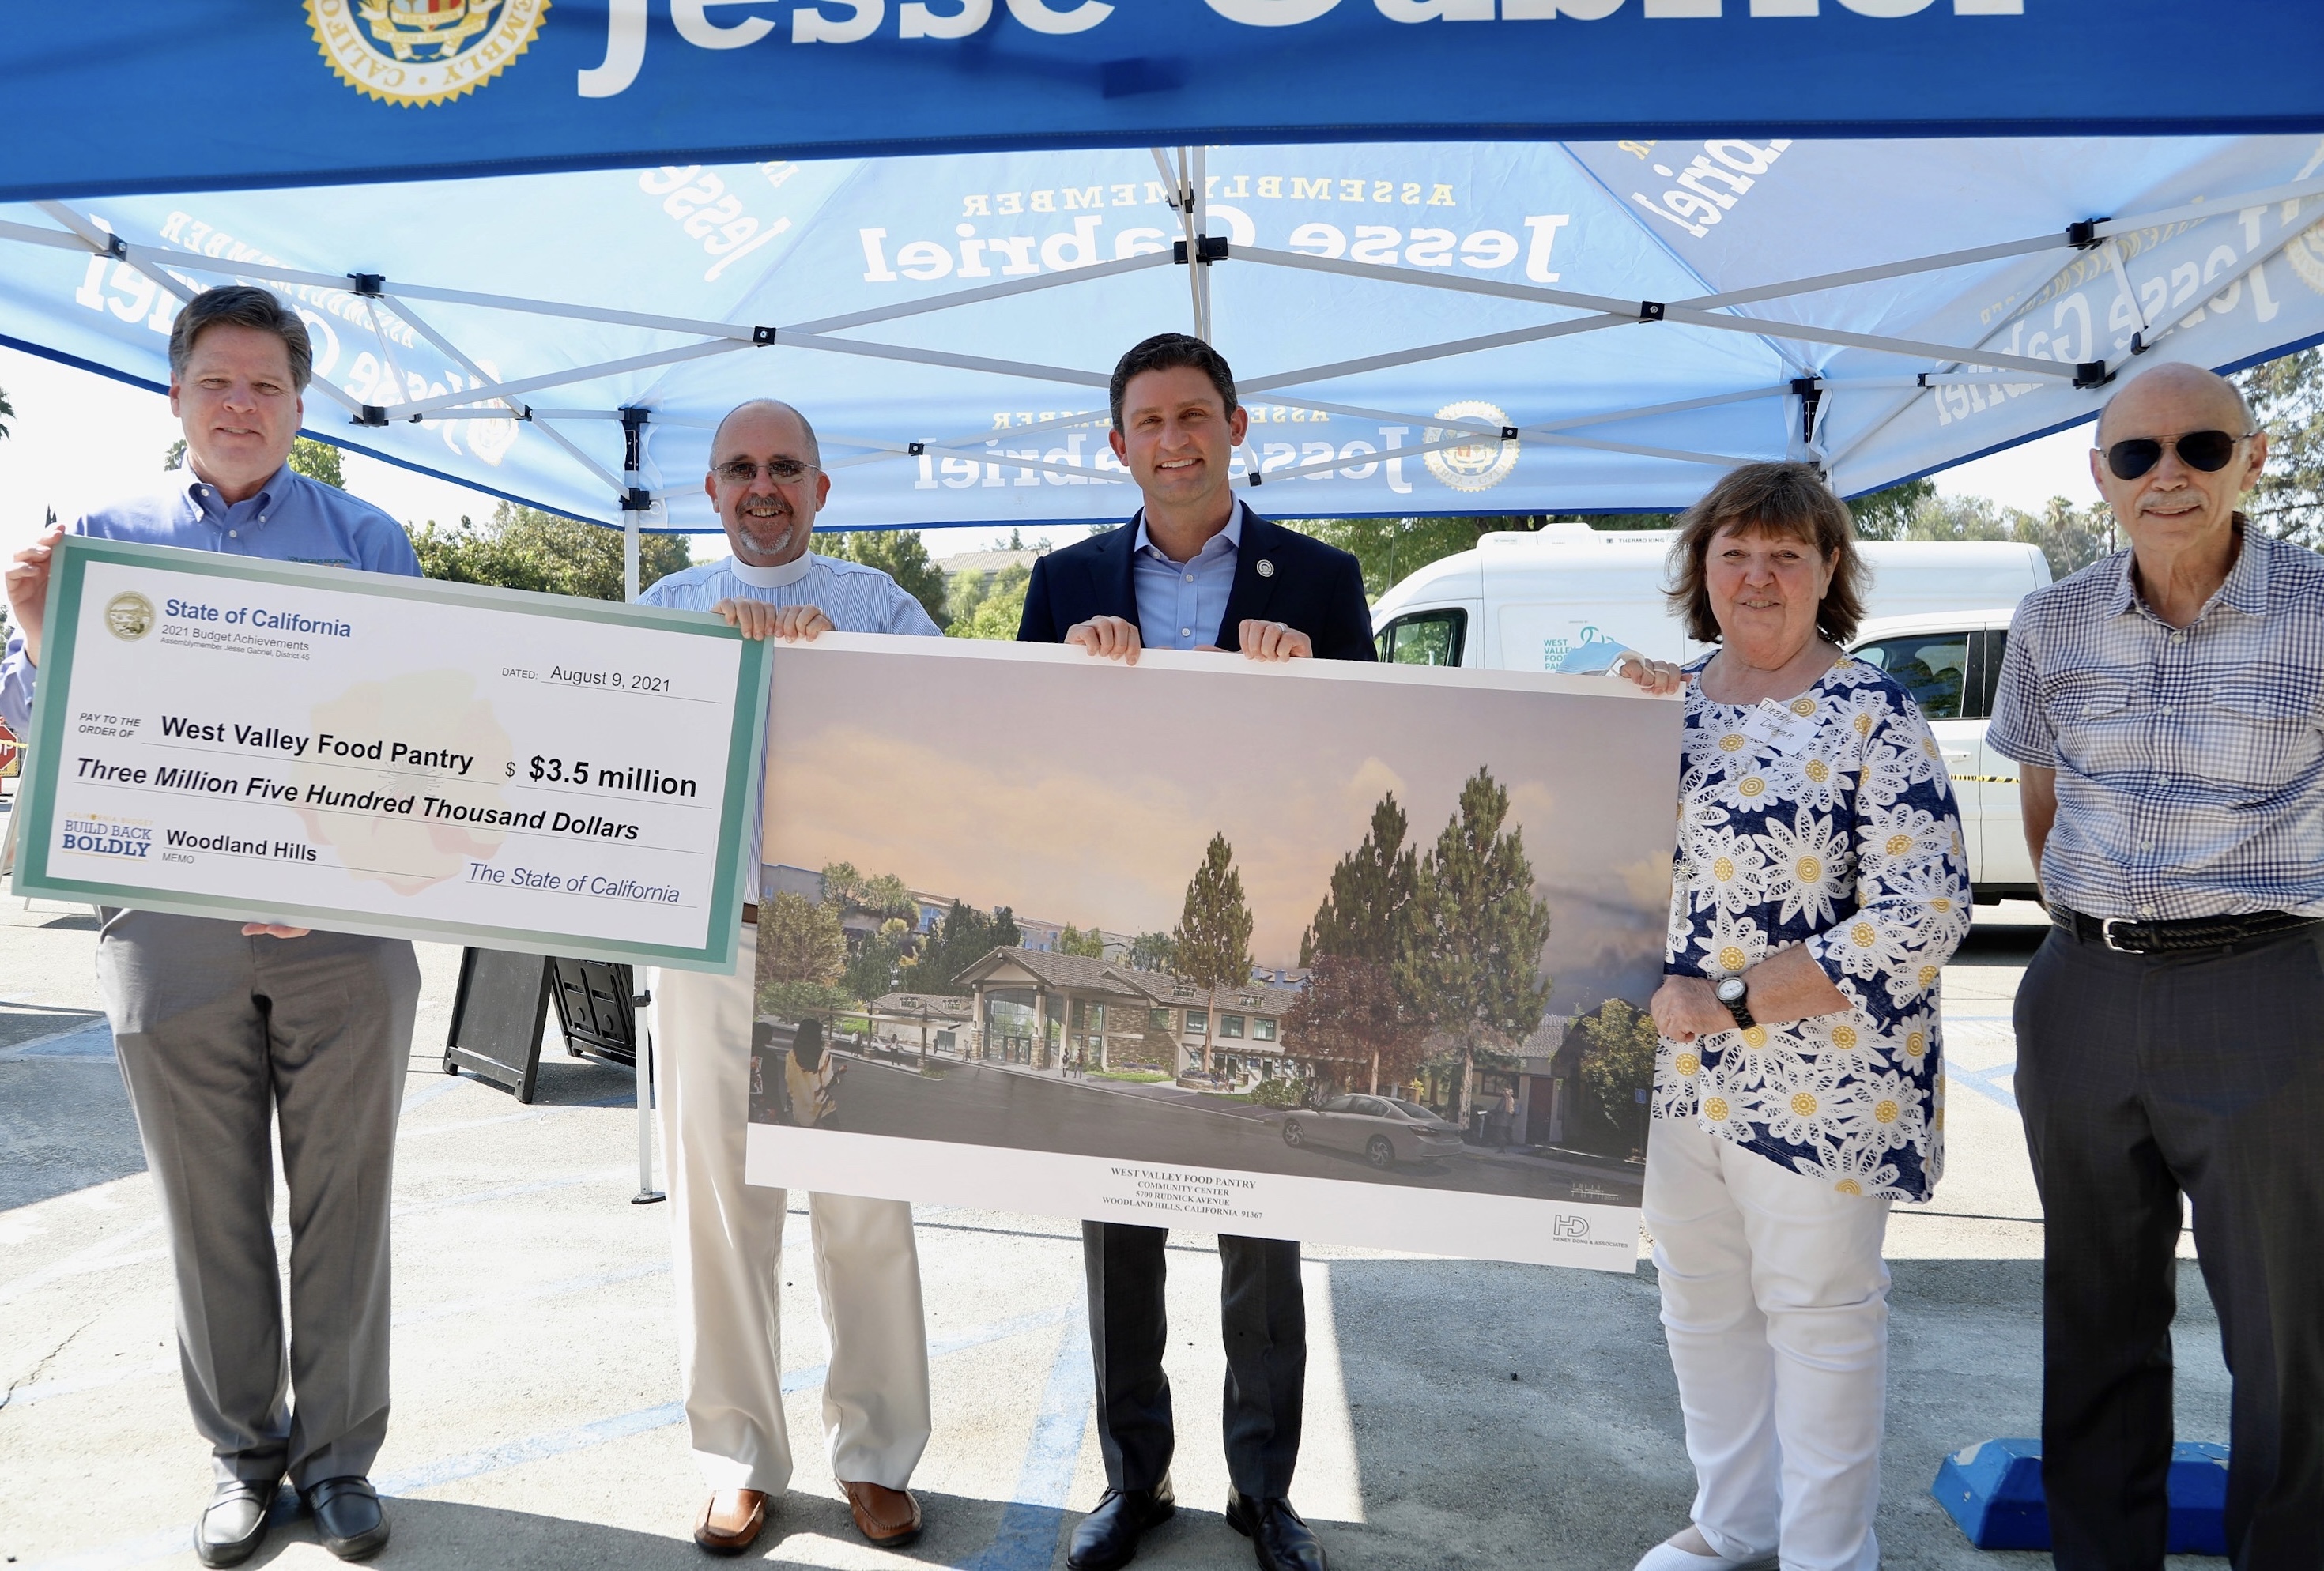 Assemblymember Jesse Gabriel (D - Woodland Hills) presents a novelty check to the West Valley Food Pantry symbolizing the recent appropriation in the state budget of $3.5 million for the pantry’s food access and homeless services efforts.